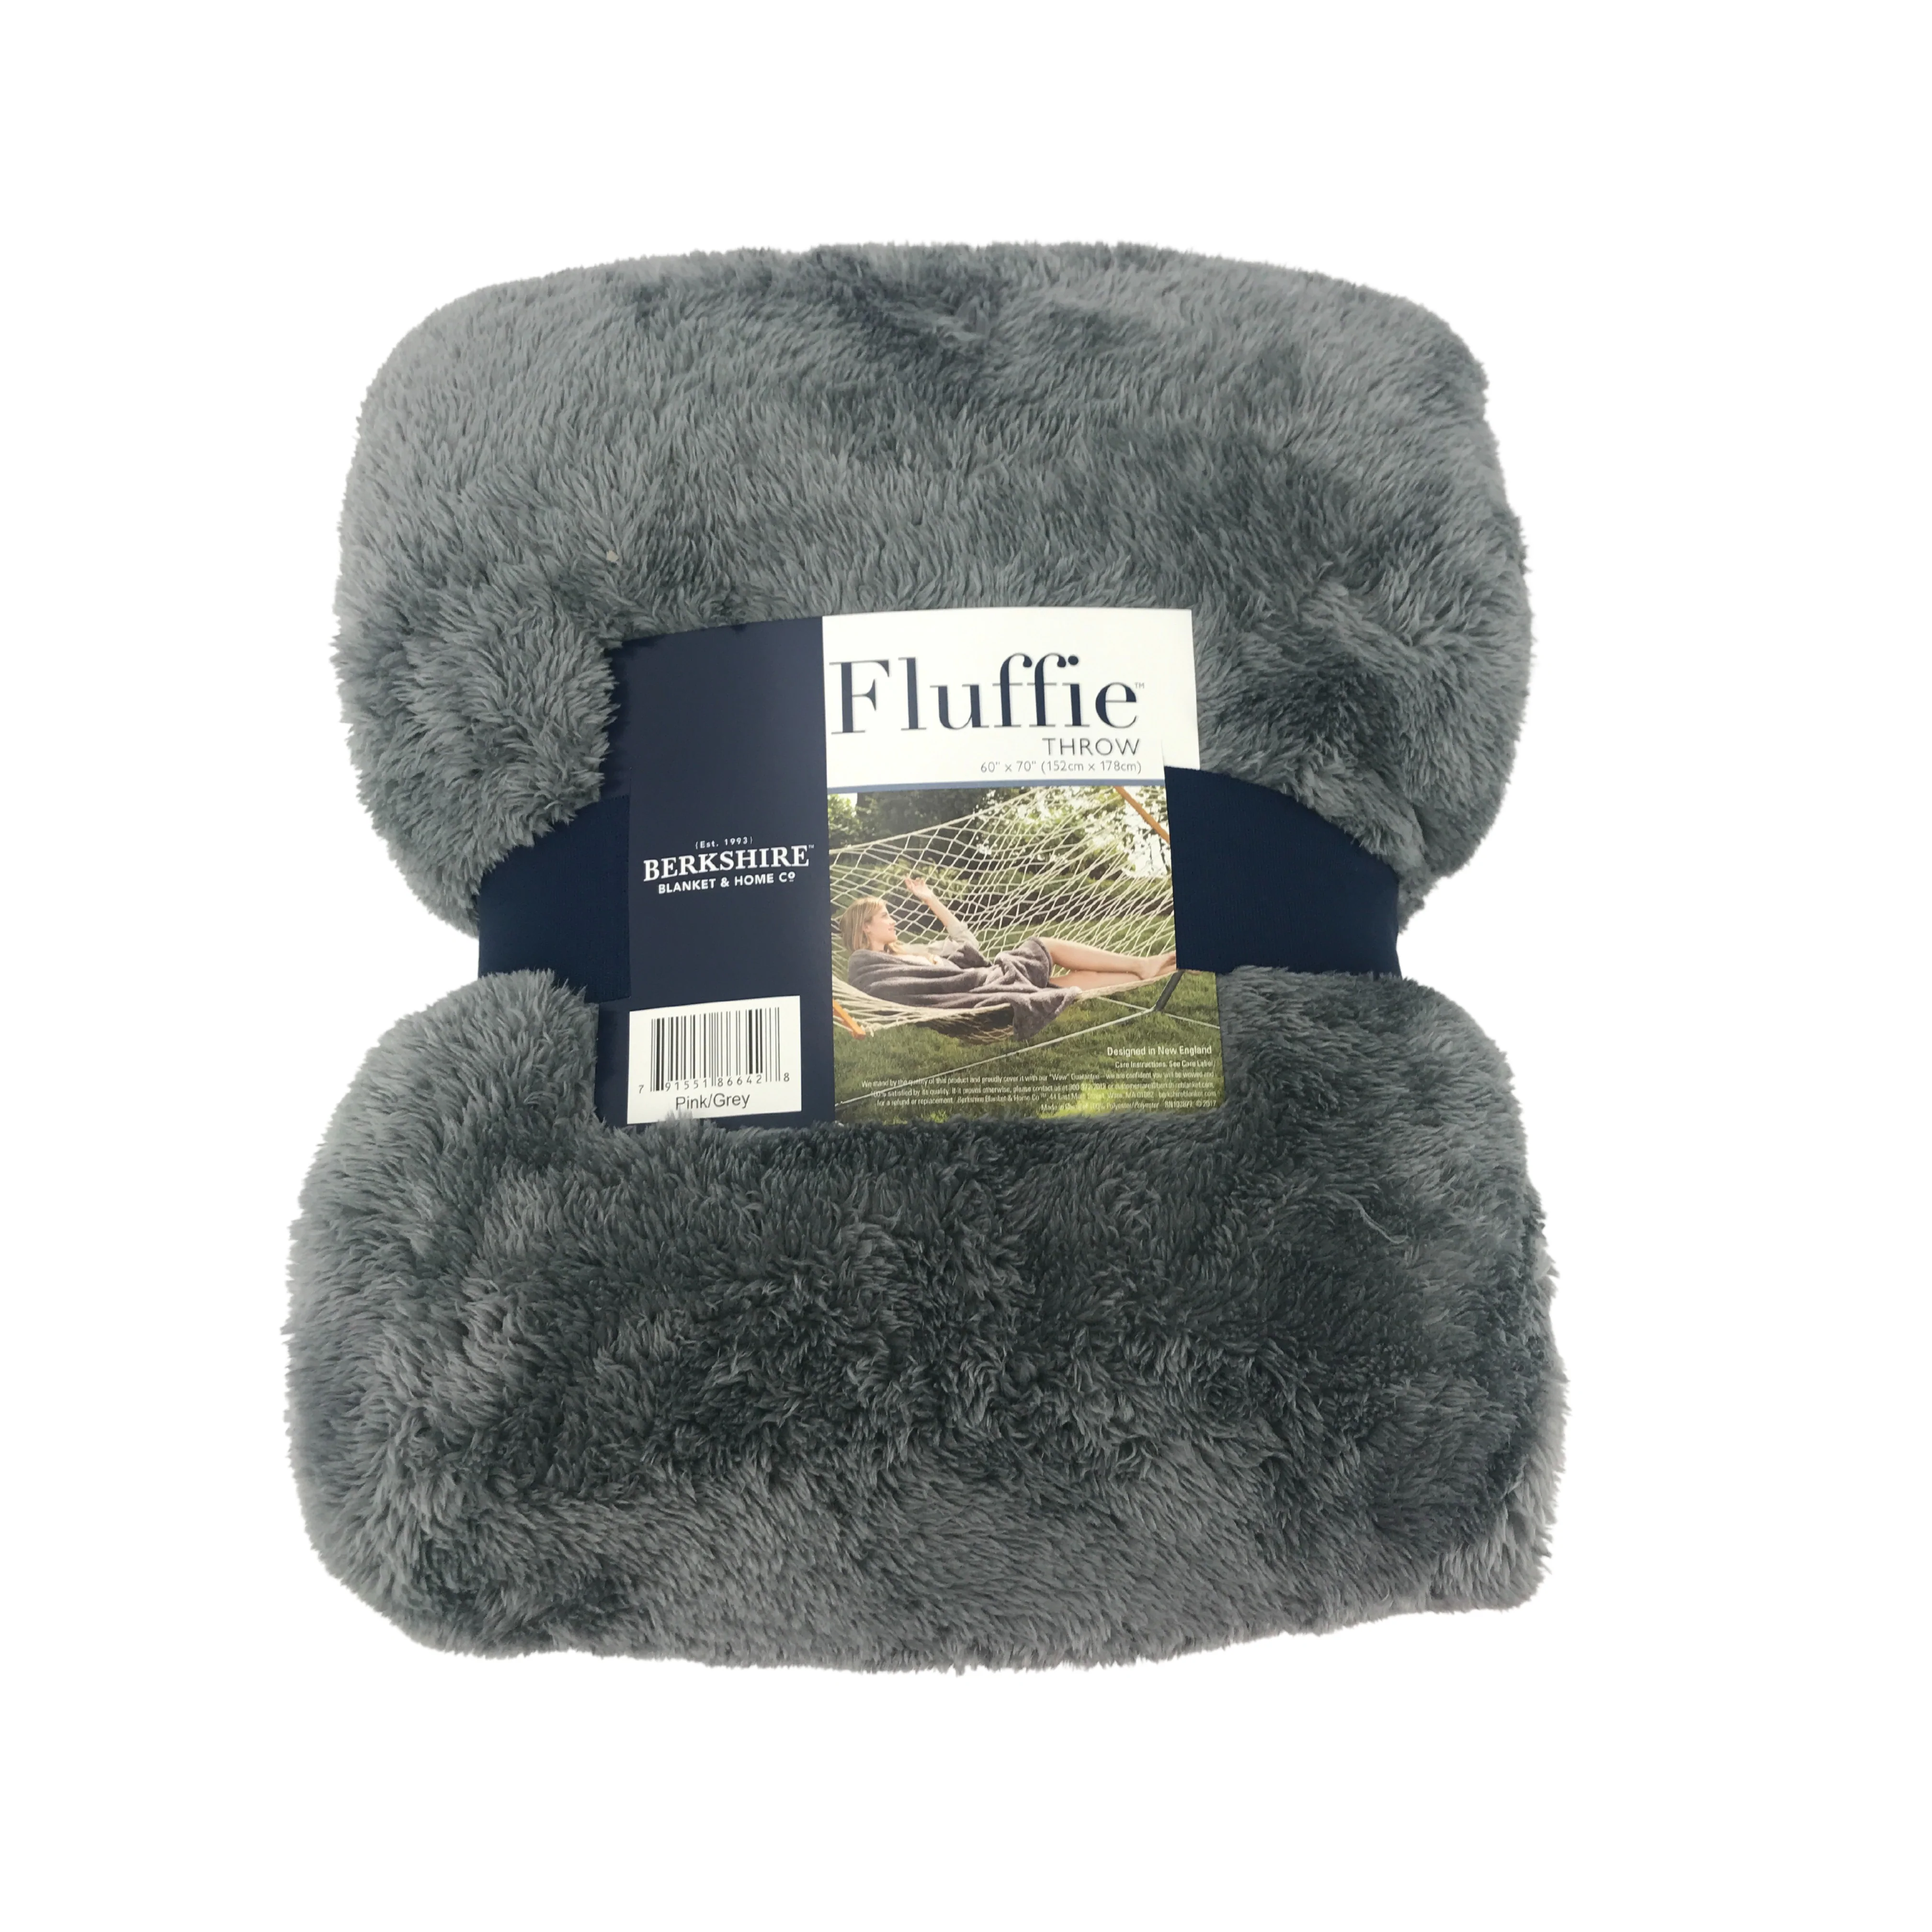 Berkshire Fluffie Throw Blanket / Pink / Grey / 2 Pack / Couch Throw / Bed Throw